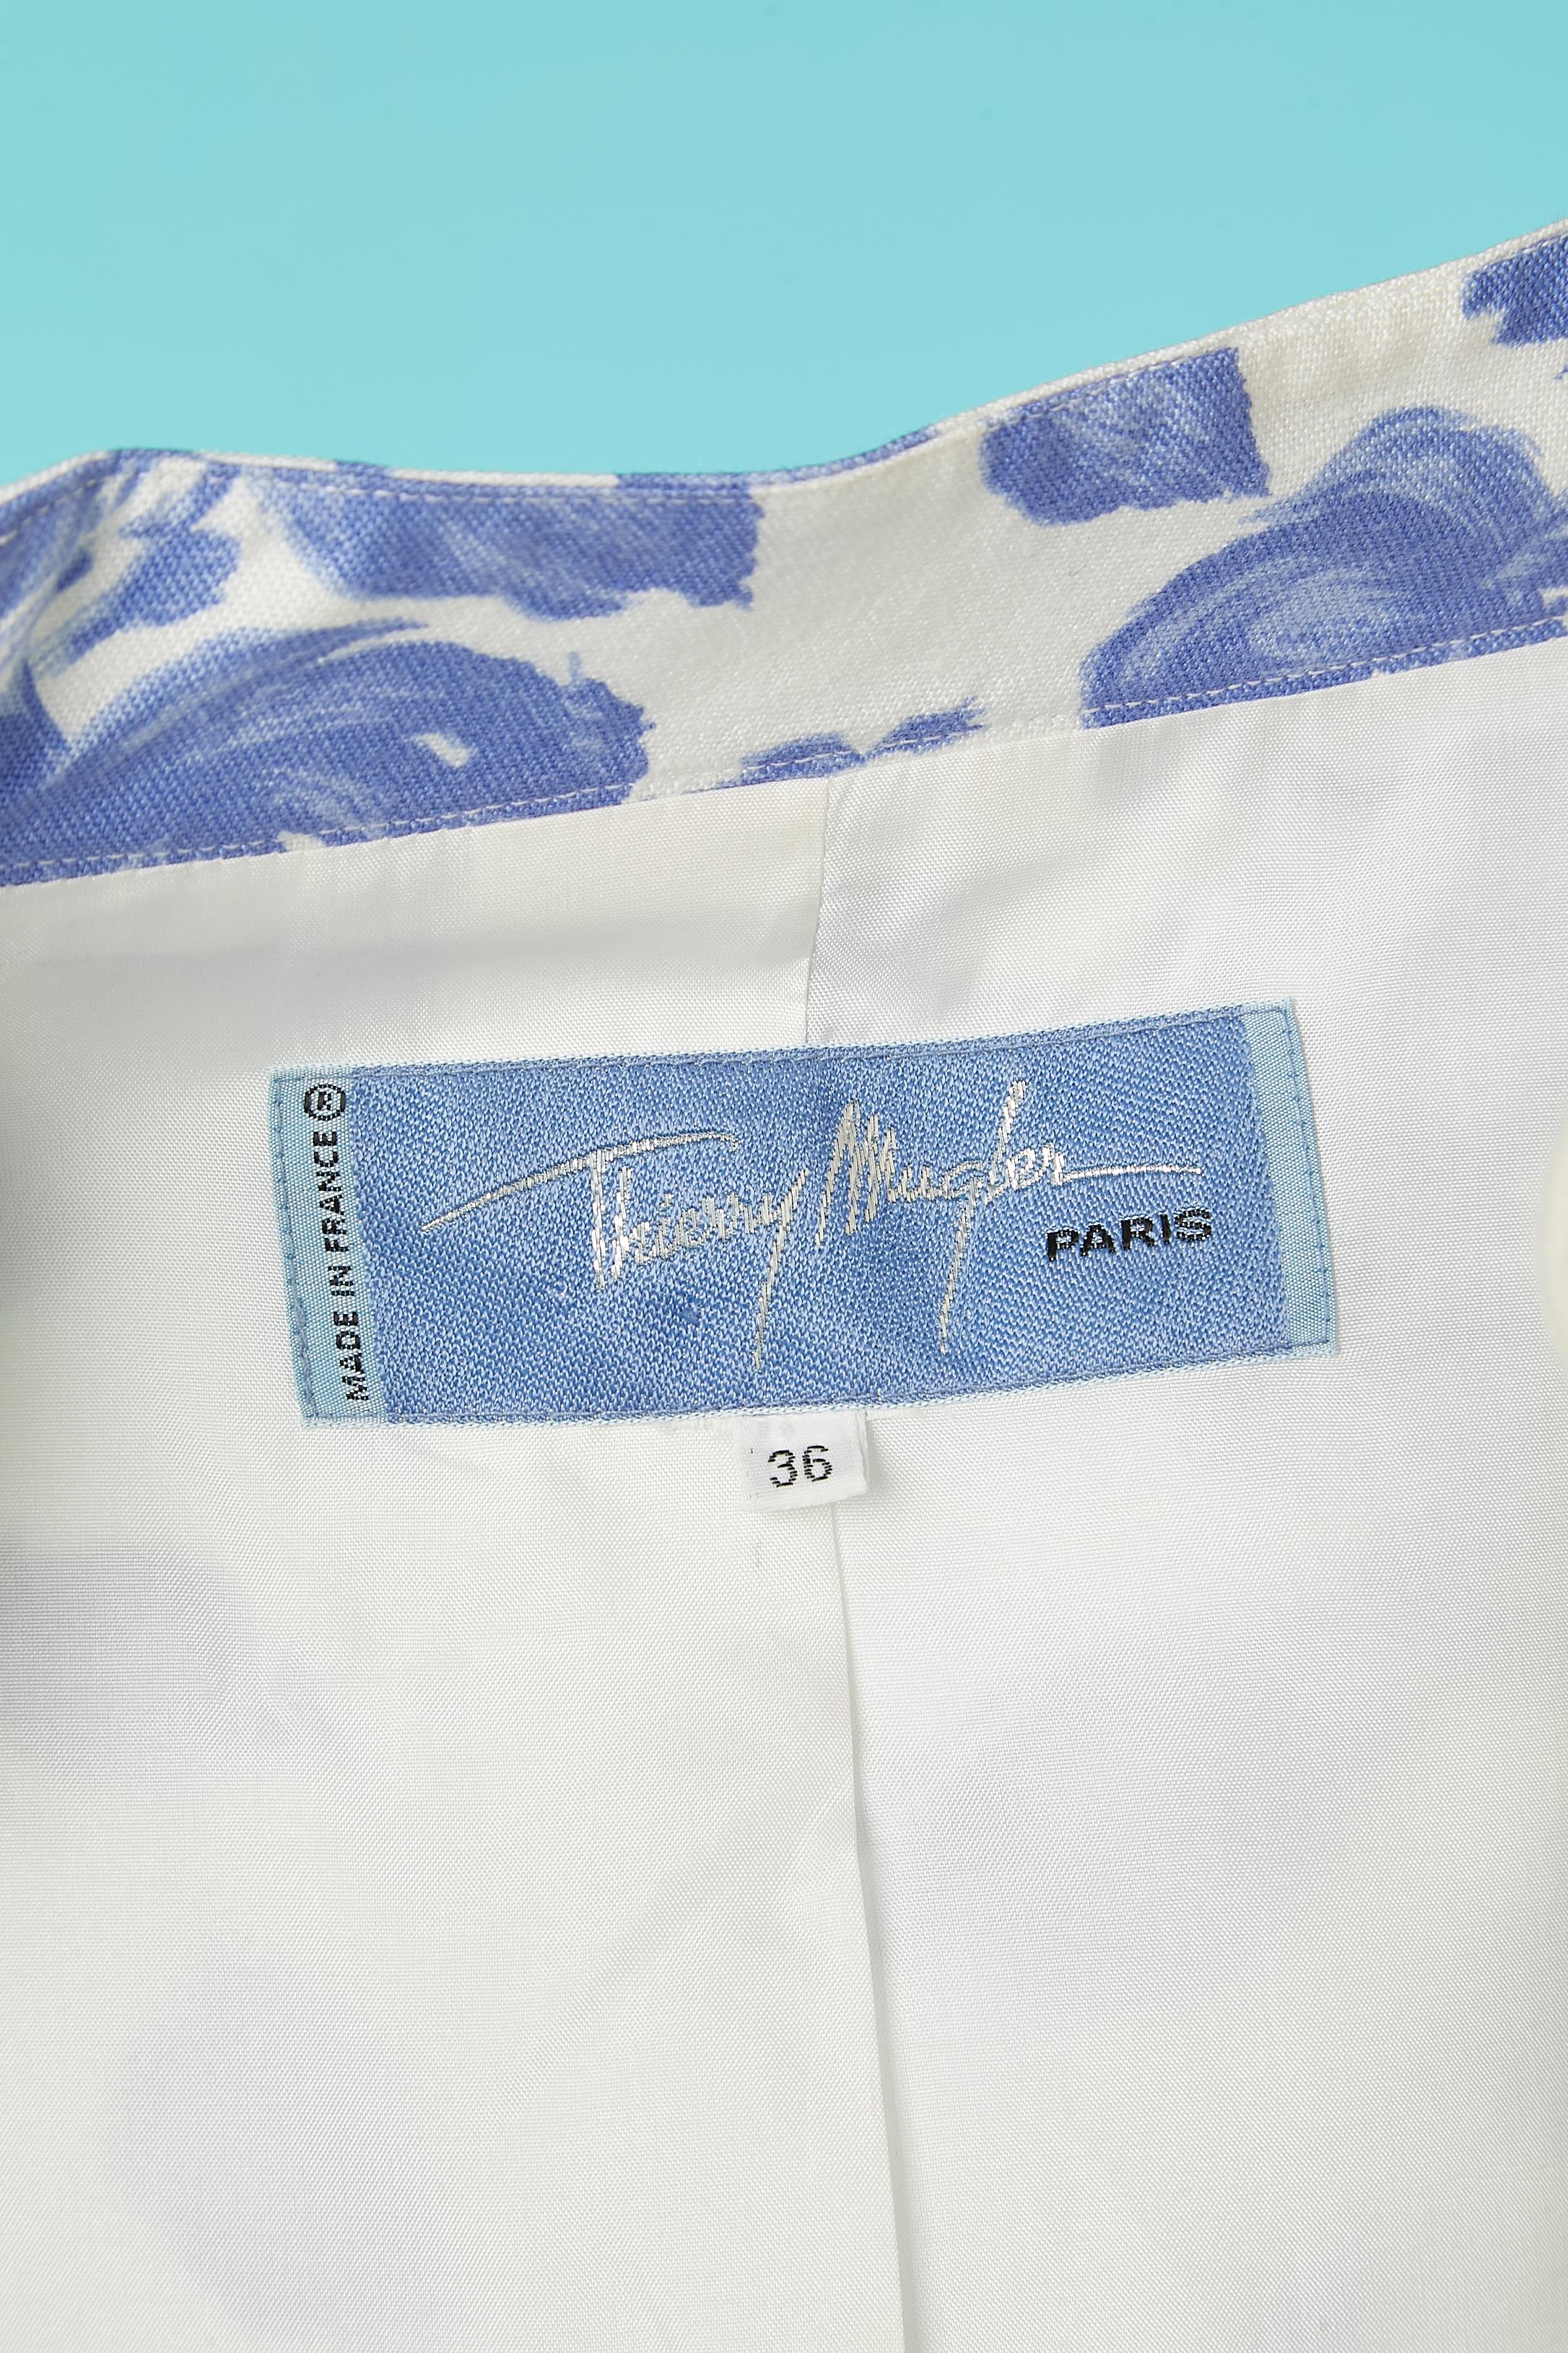 White skirt-suit with blue flower print Thierry Mugler Circa 1980's  For Sale 2